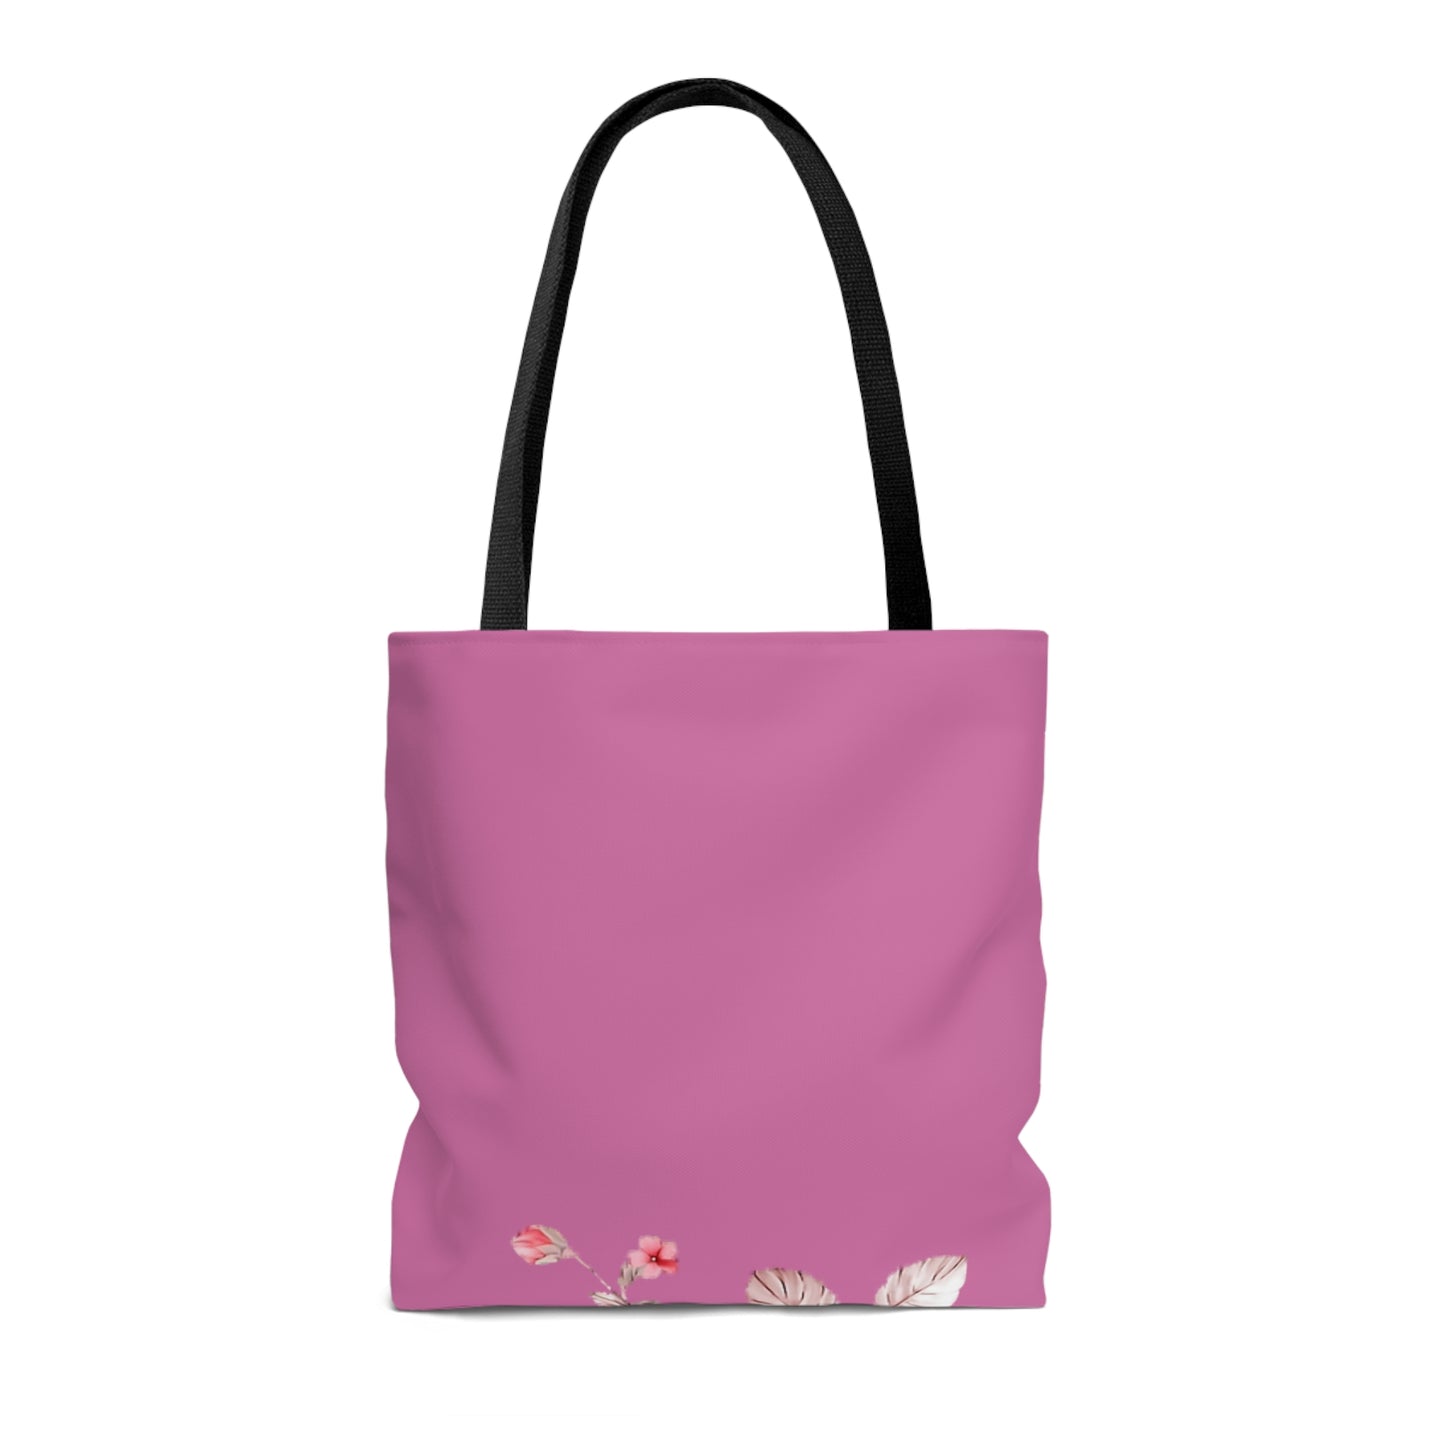 Beautiful Bag for Women, unique design, strong women who need comfort, perfect gift